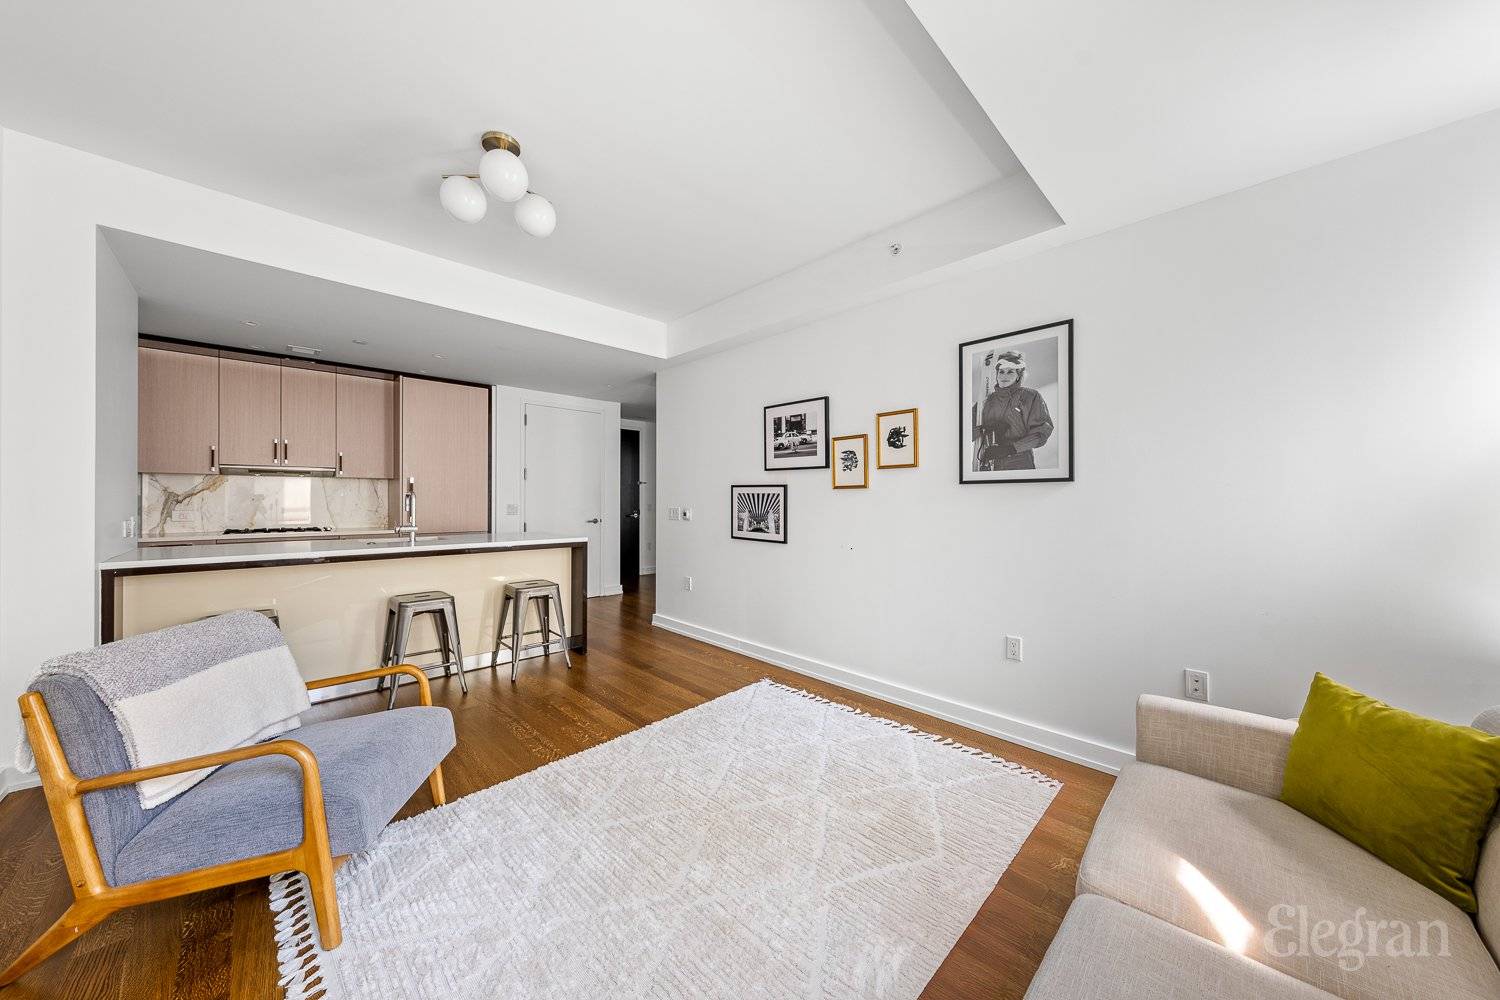 One of Chelsea s most competitively priced and meticulously designed two bedroom units in the full service Seymour Condominium of West Chelsea.